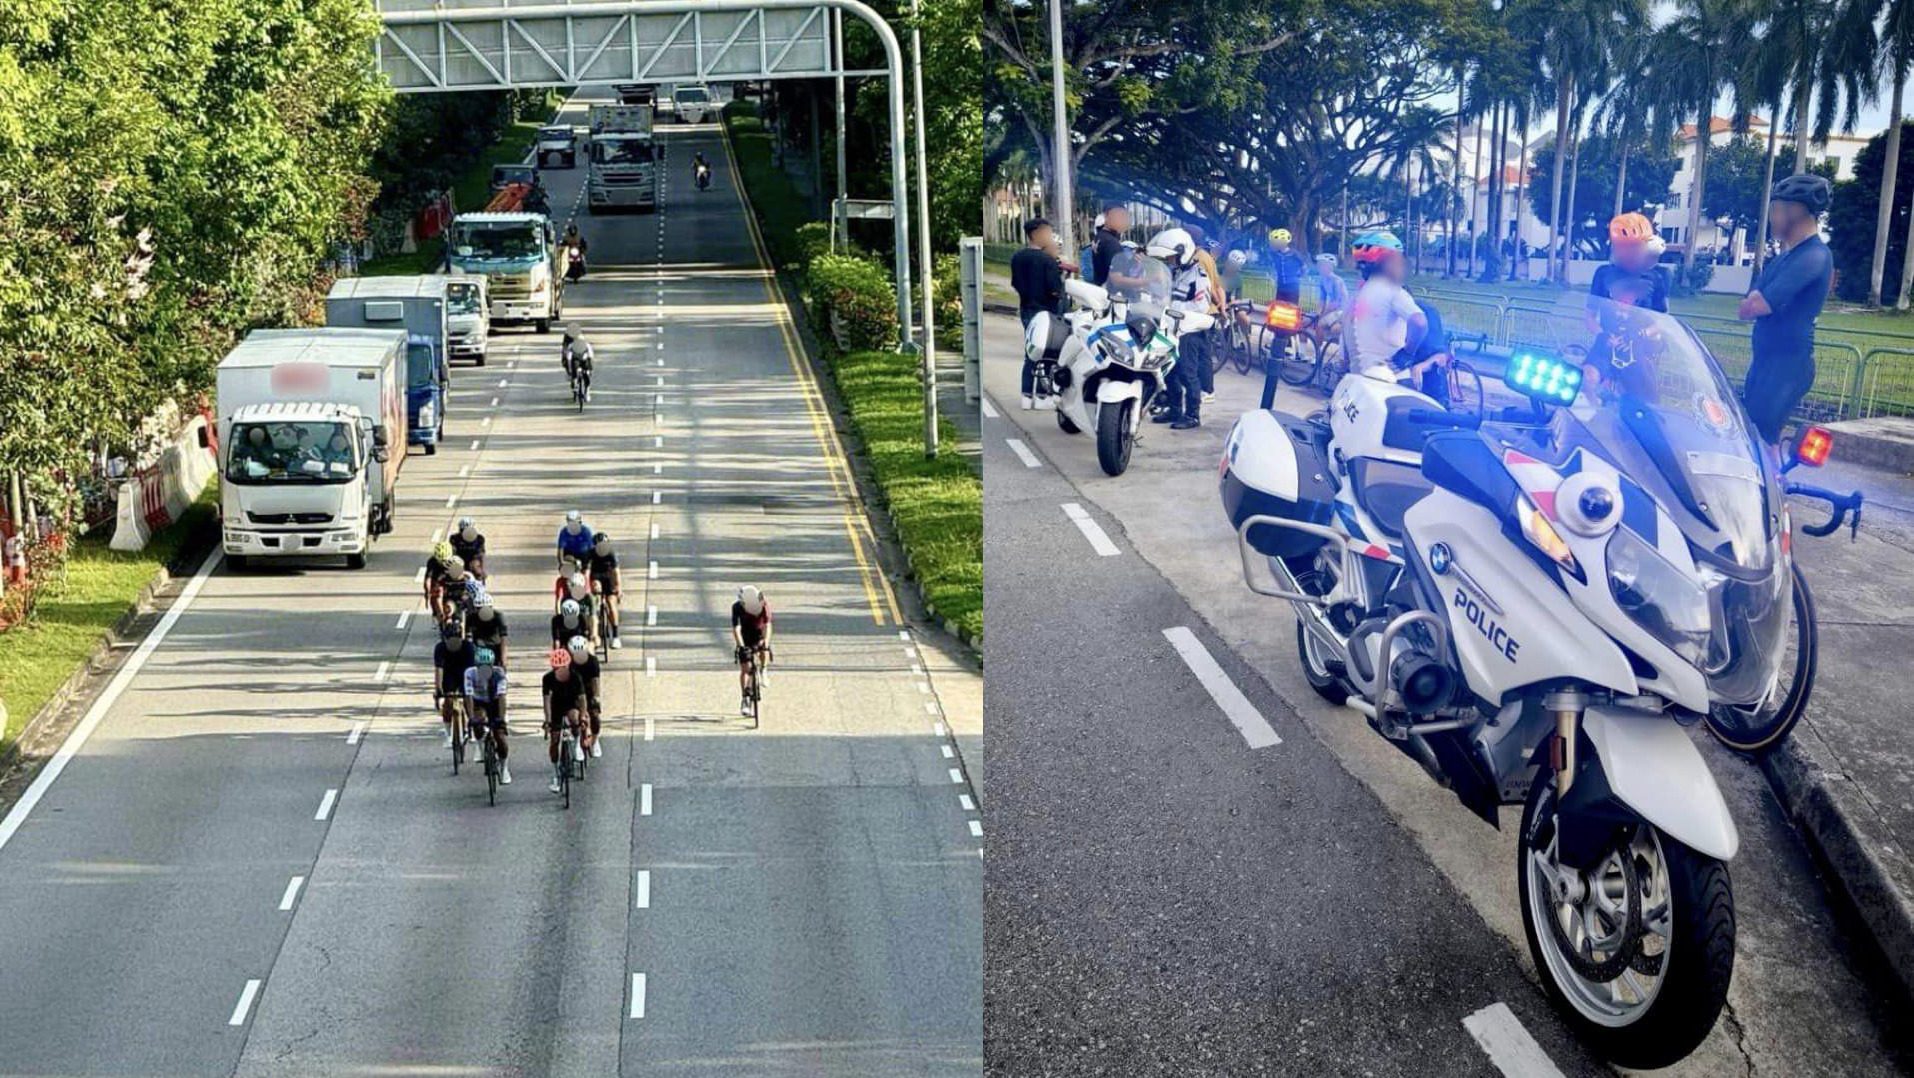 25 cyclists were caught for riding in larger than permitted groups along Clementi Road and West Coast Highway